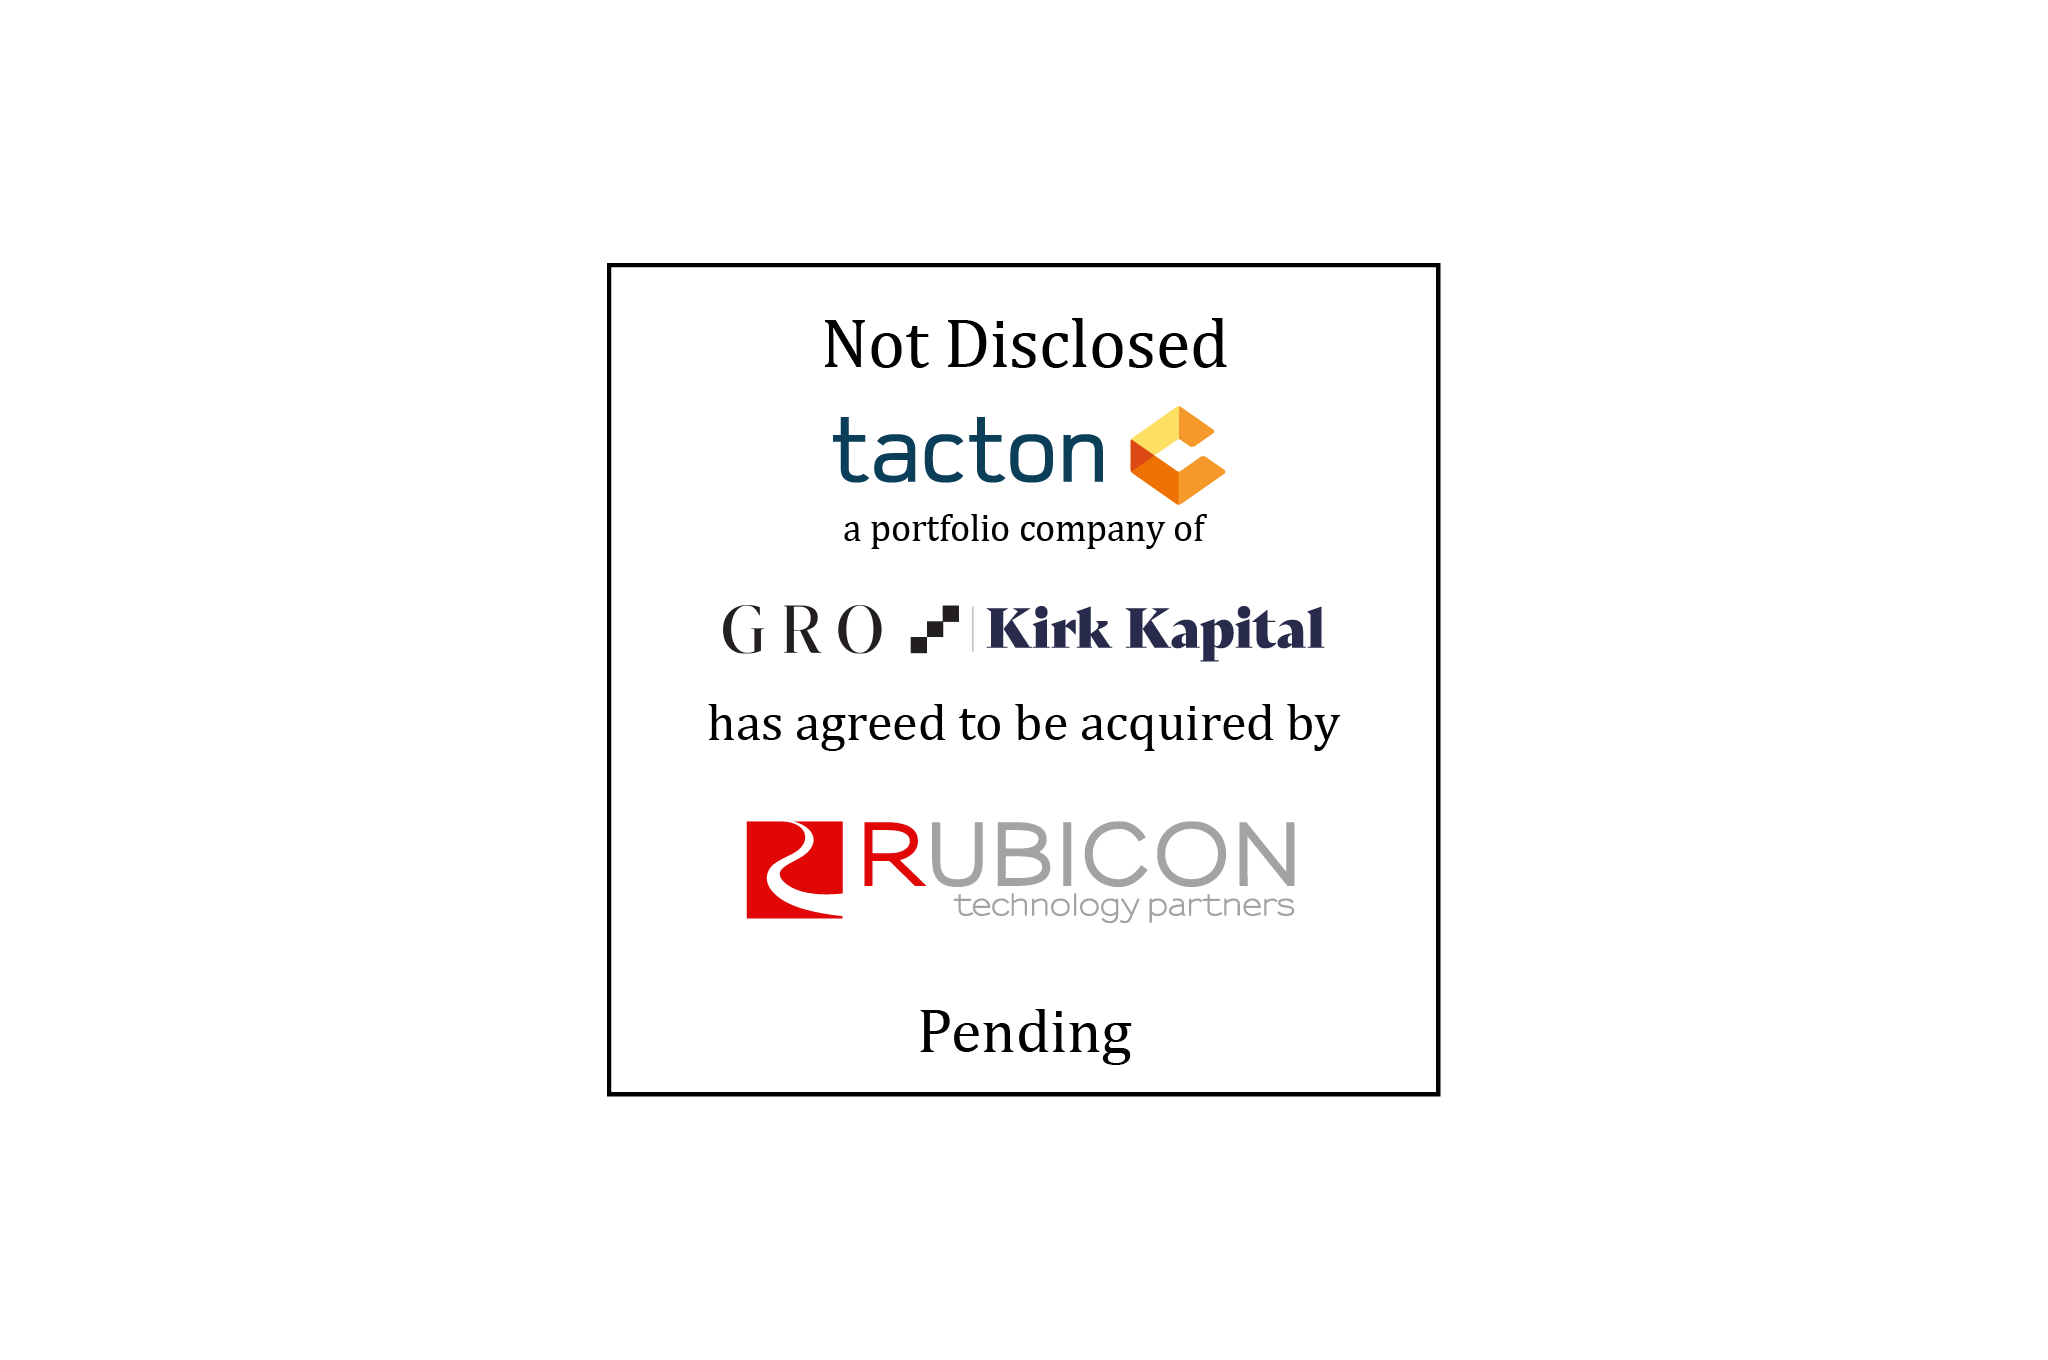 Not Disclosed | Tacton Systems (logo), a portfolio company of GRO and Kirk Kapital, has agreed to be acquired by Rubicon Technology Partners (logo) | Pending